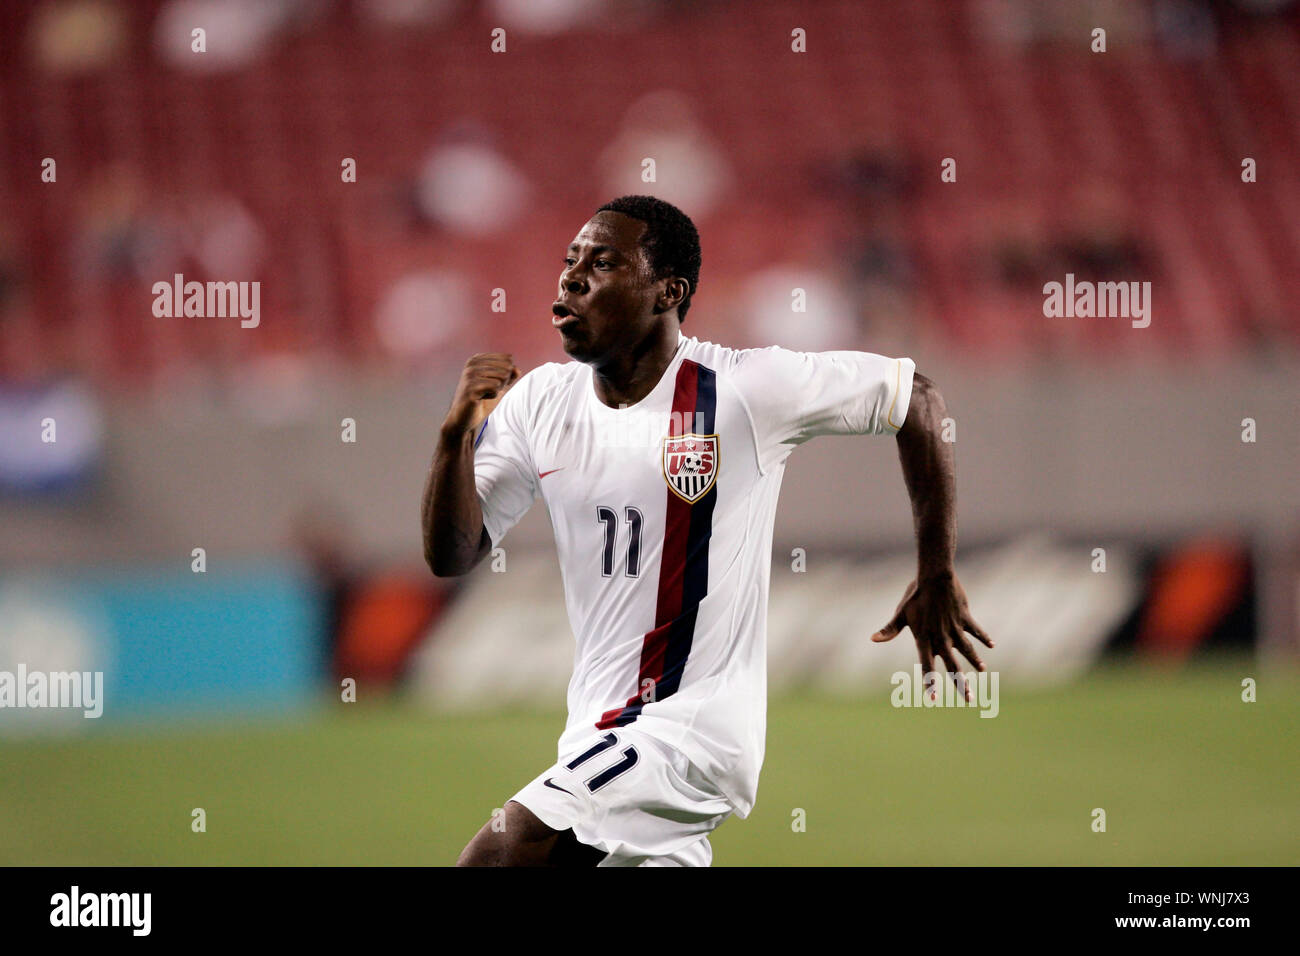 United States Under-23 Men's National Team forward Freddy Adu (11) celebrates a first half goal during a 2008 CONCACAF Olympic Qualifying game. Stock Photo